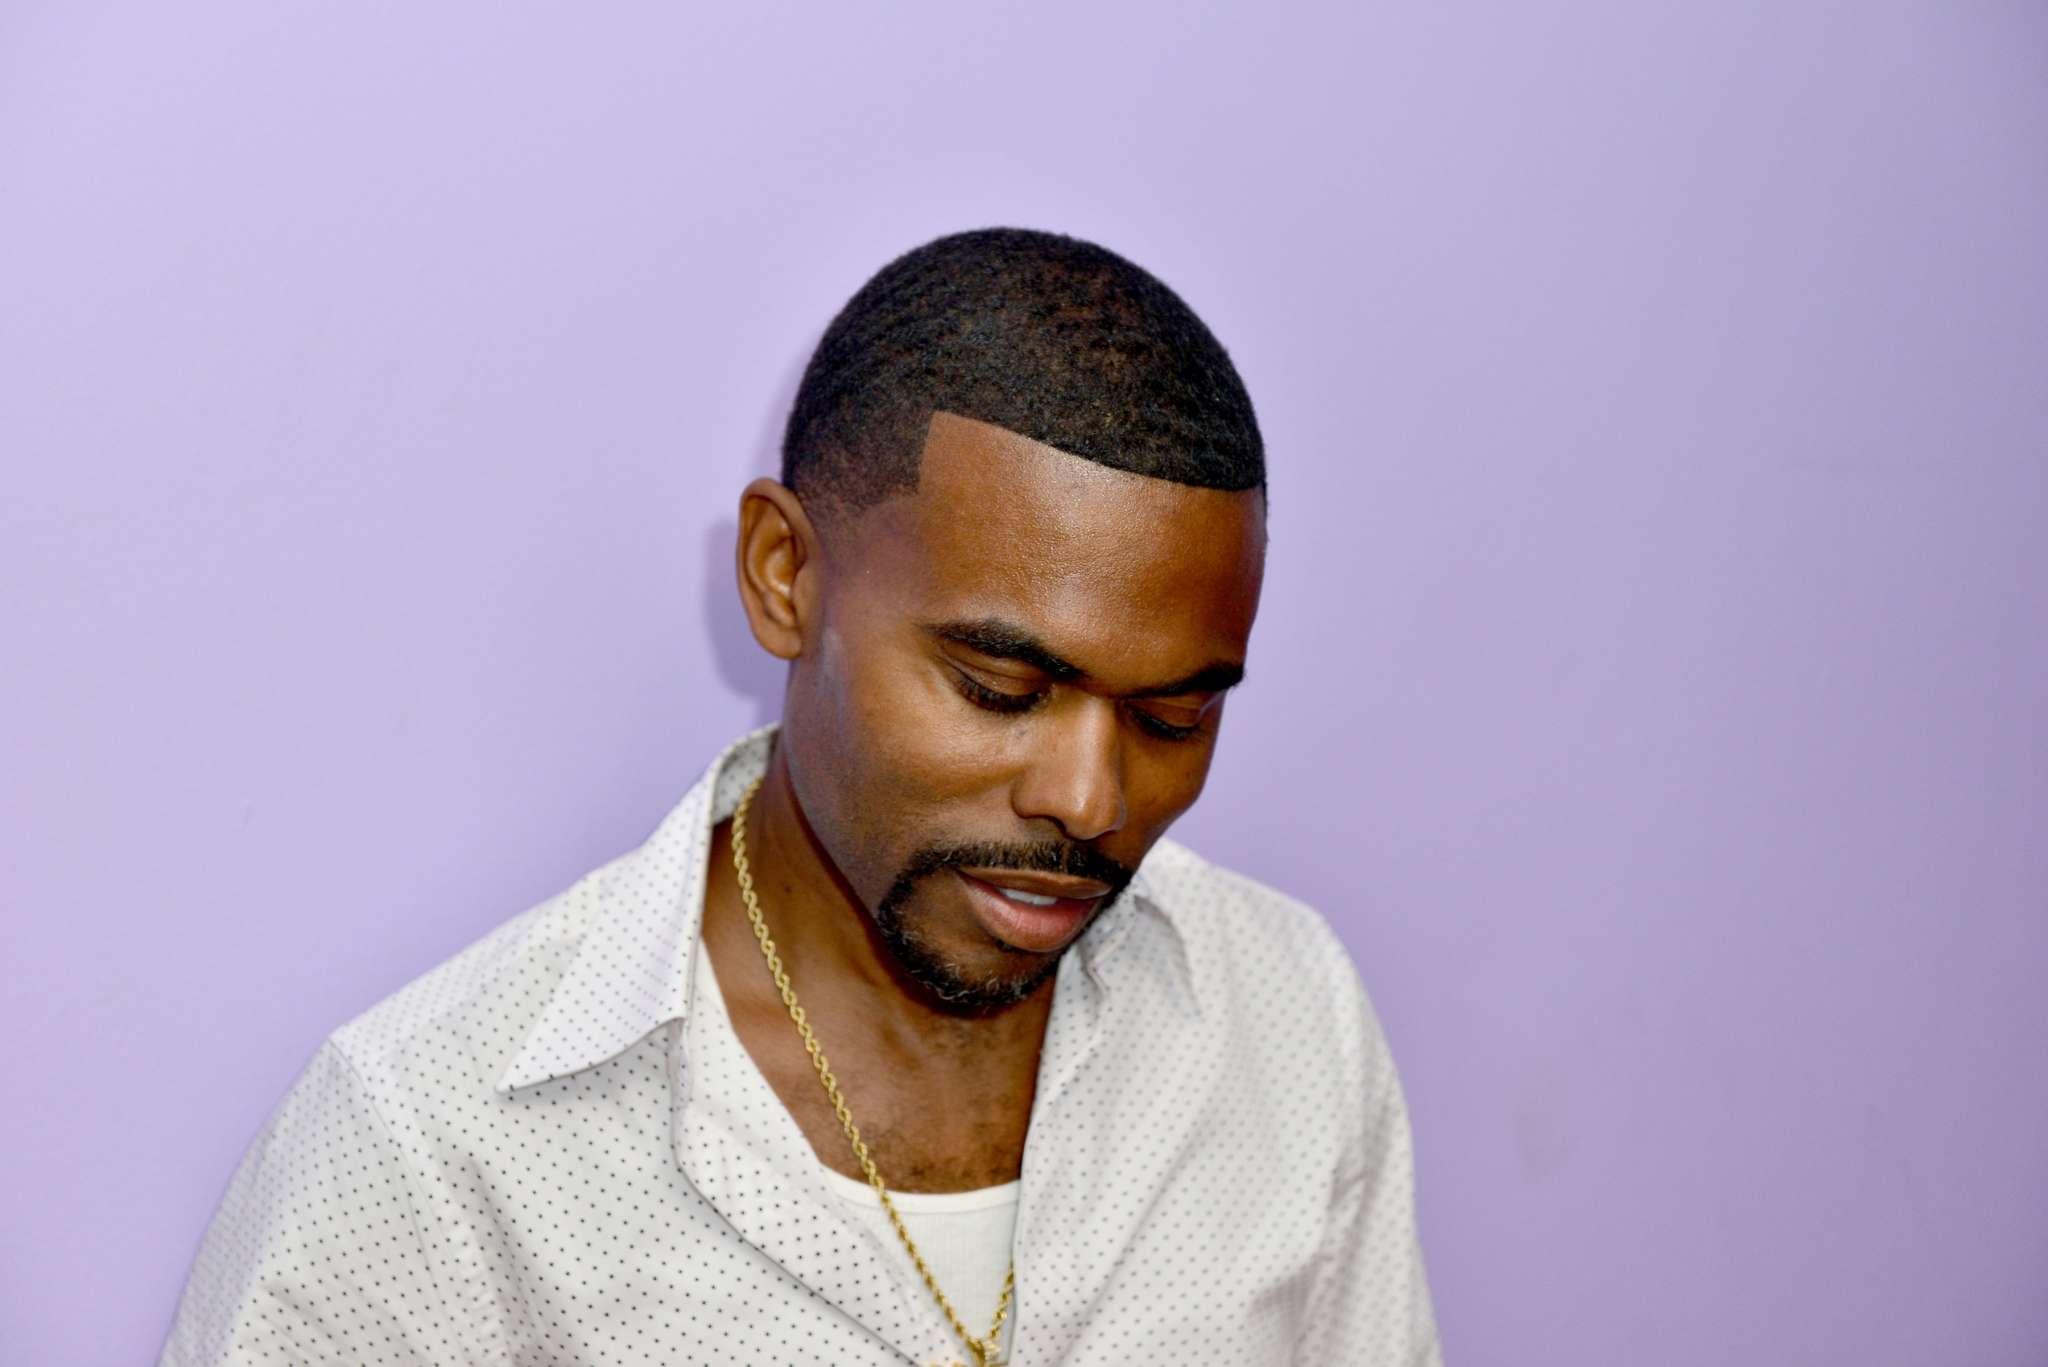 lil-duval-drops-a-message-about-women-read-it-here